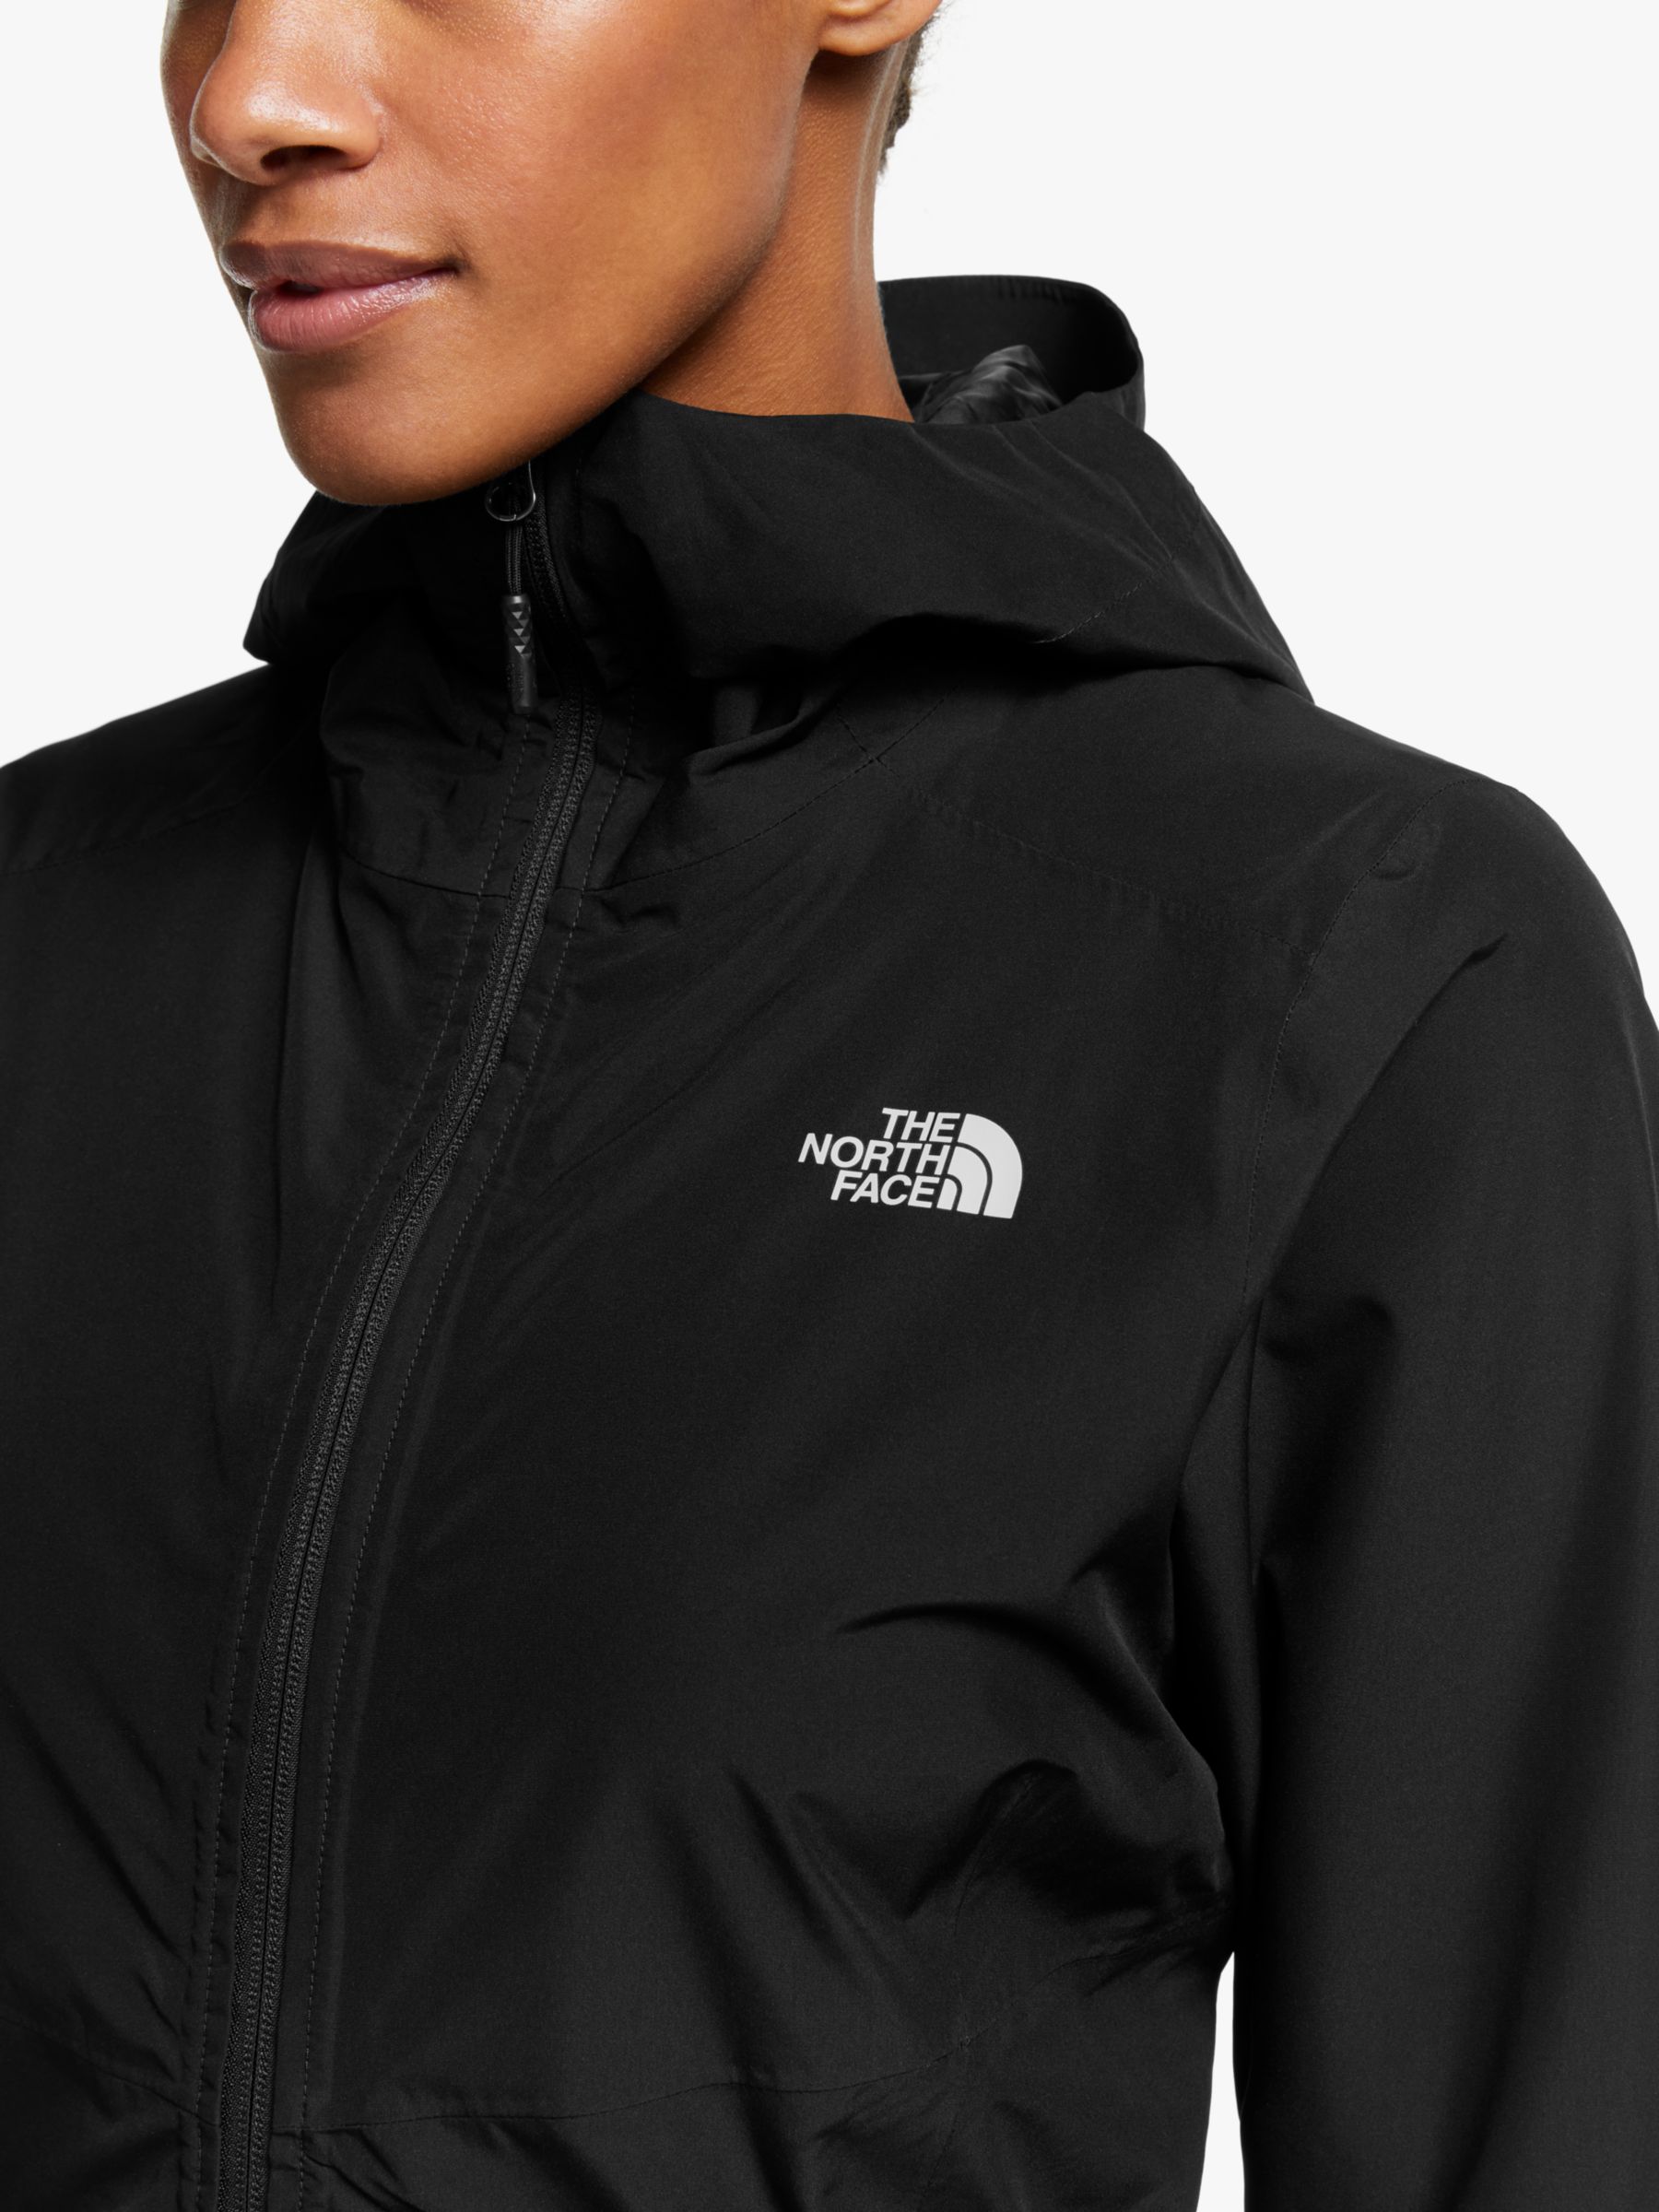 Buy The North Face Hikesteller Women's Waterproof Parka Shell Jacket Online at johnlewis.com